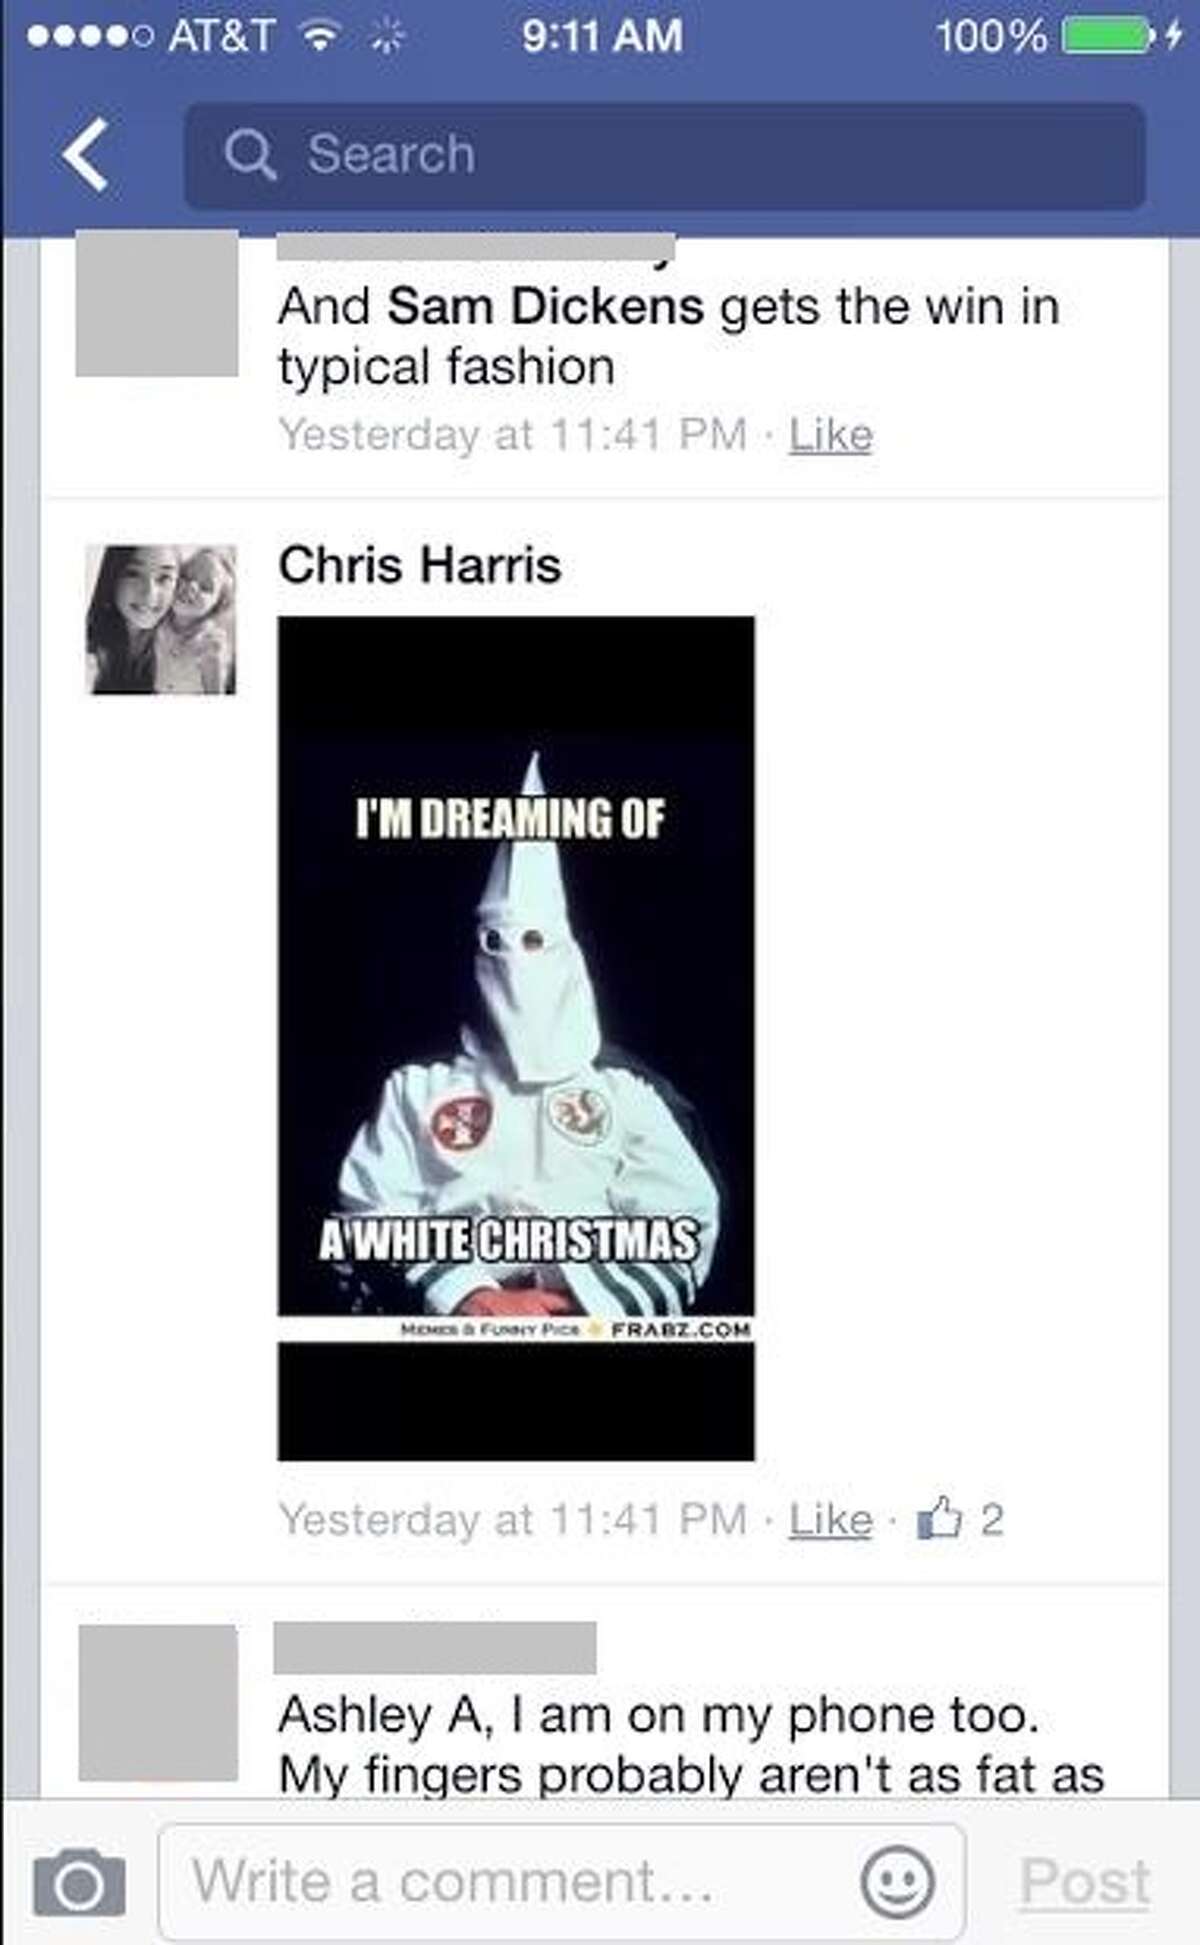 A board member at a North Texas school district has resigned after posting an image of a Ku Klux Klan member with the caption "I'm dreaming of a white Christmas" and several racist remarks on his Facebook page last Monday.